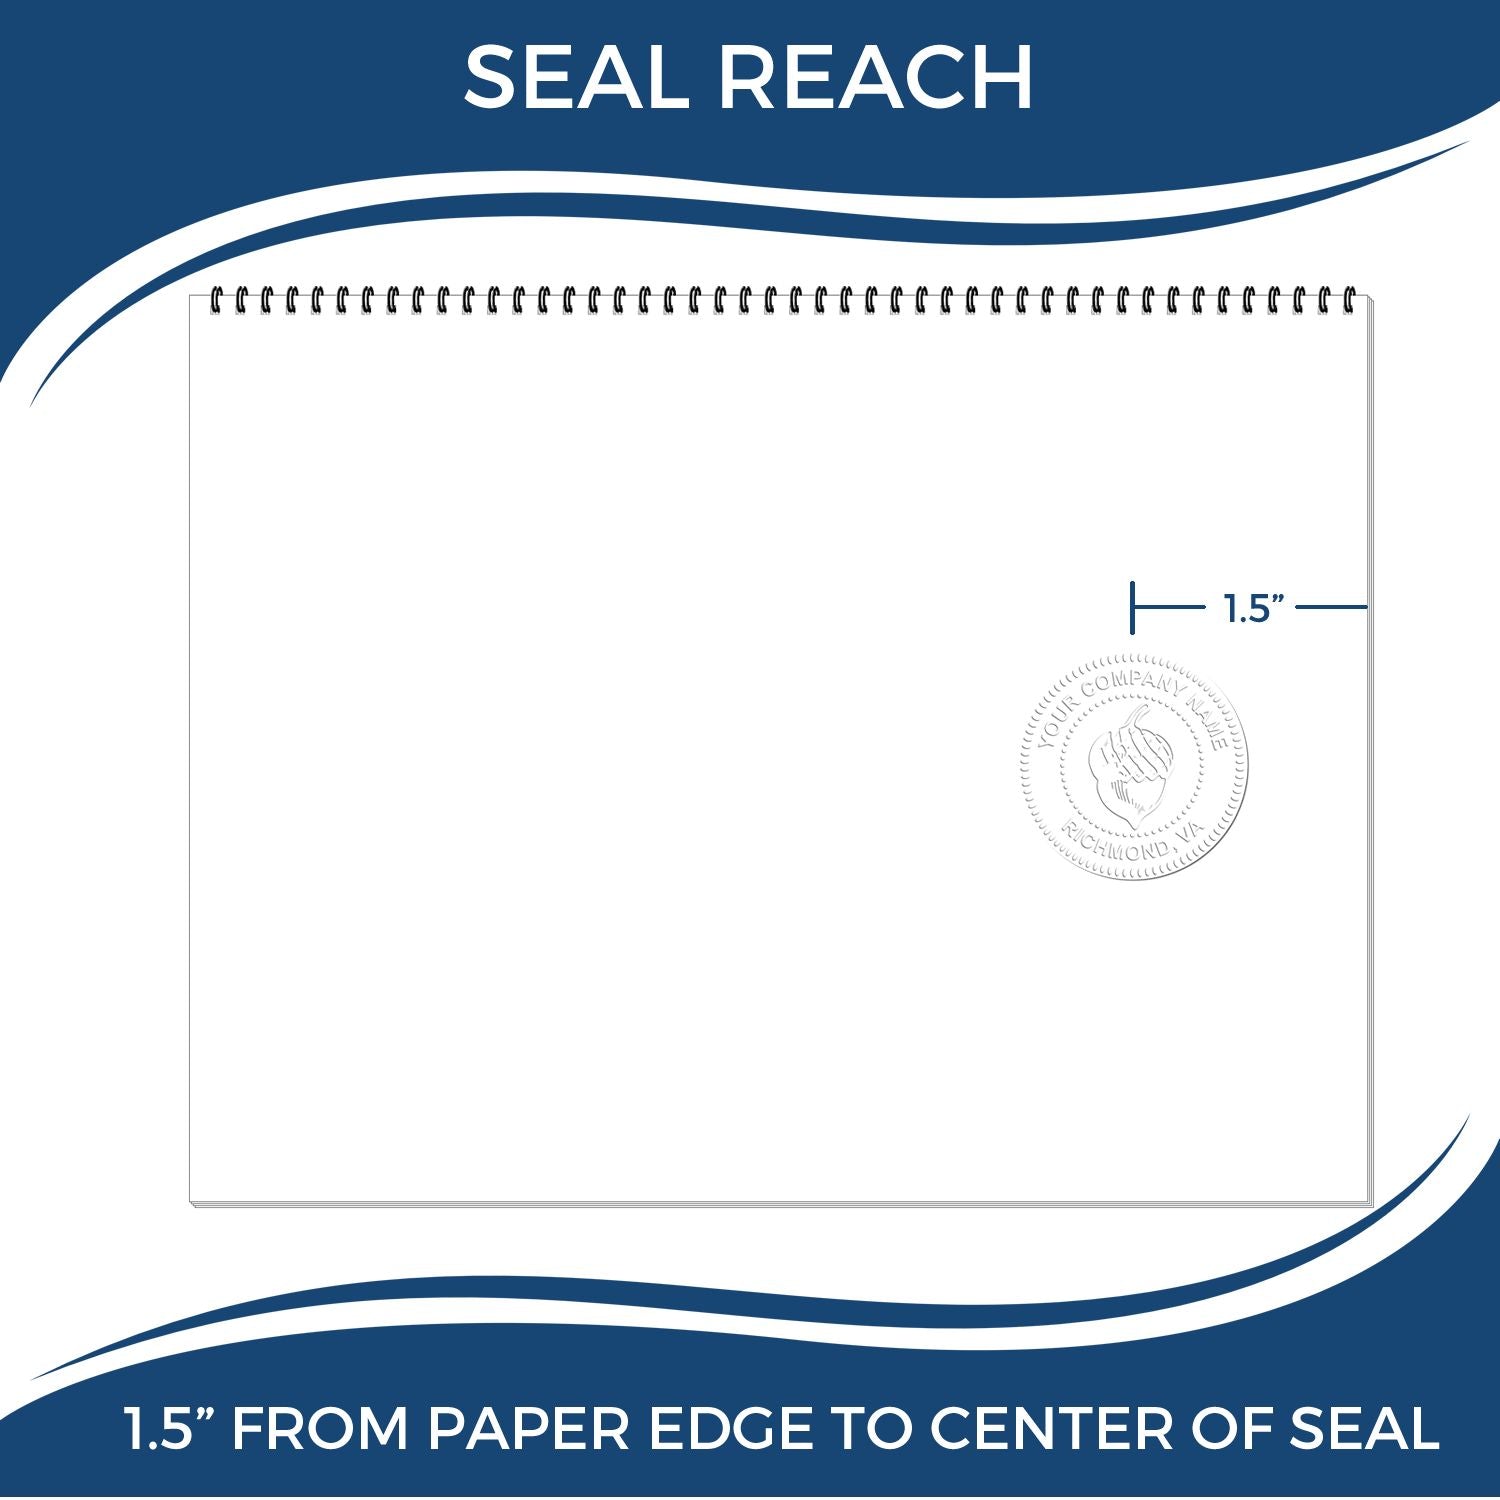 An infographic showing the seal reach which is represented by a ruler and a miniature seal image of the New York Desk Surveyor Seal Embosser